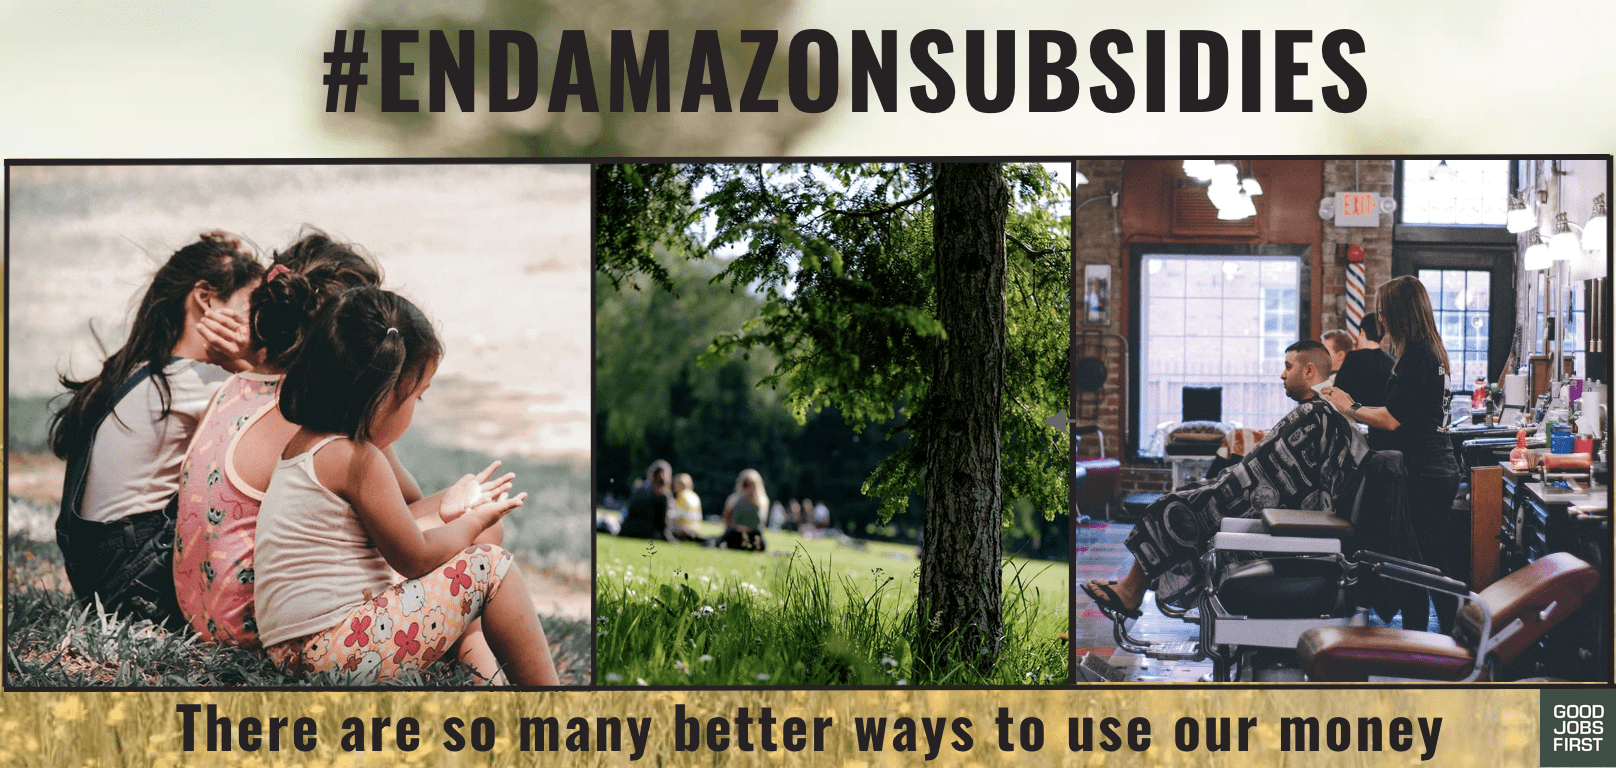 End Amazon Subsidies. There are better ways to use our money. That text is on an image with three children, a park, and a barbershop.